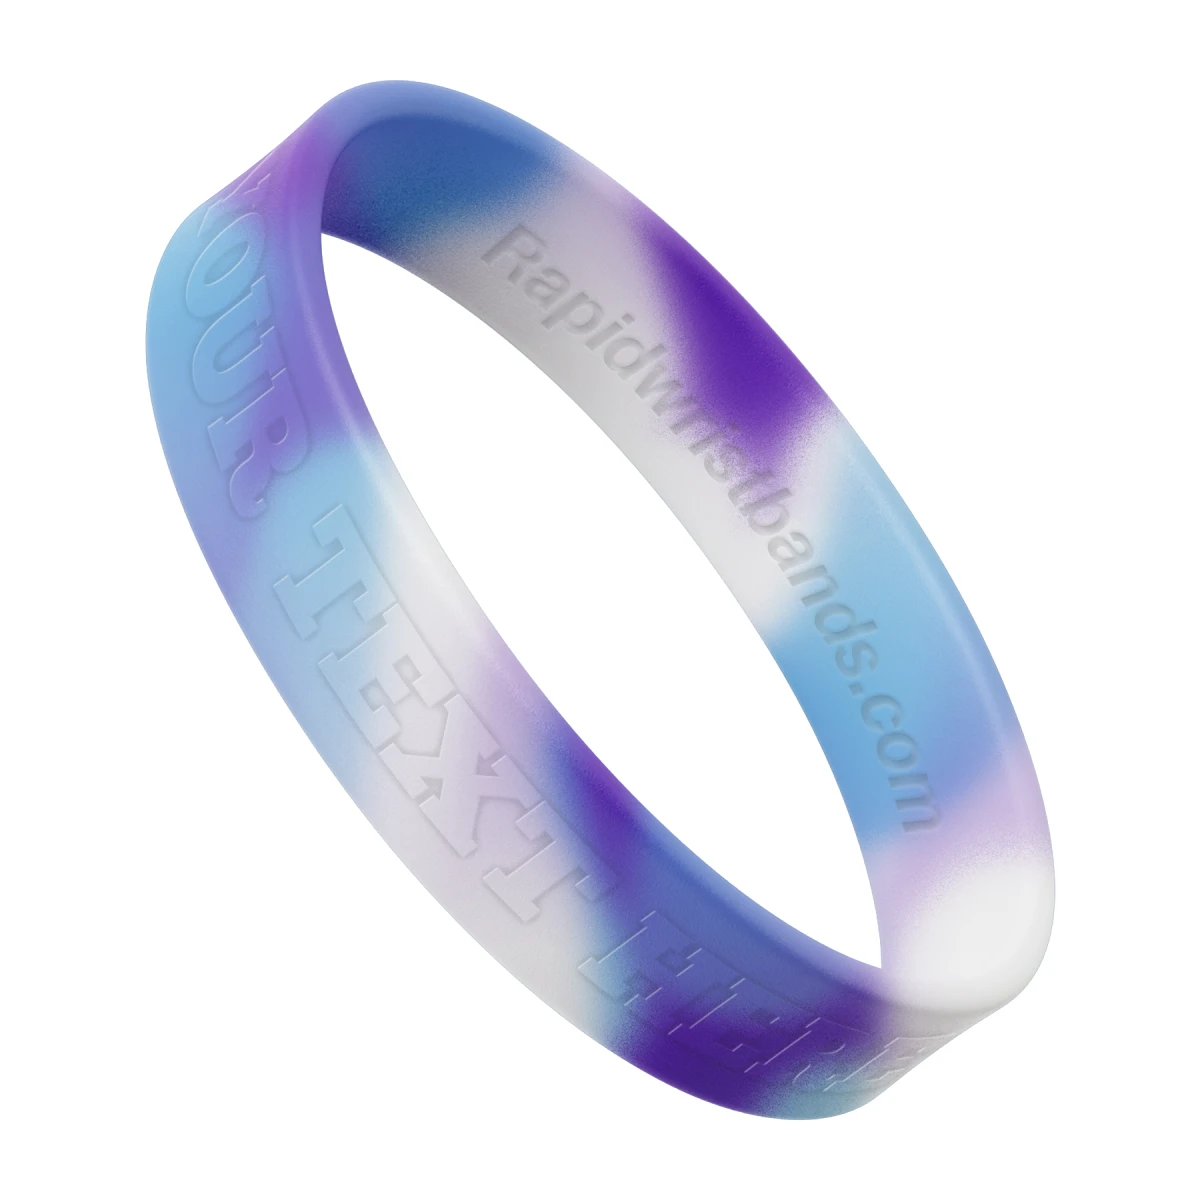 Swirl Light Blue/White/Violet Wristband With Your Text Here Embossed